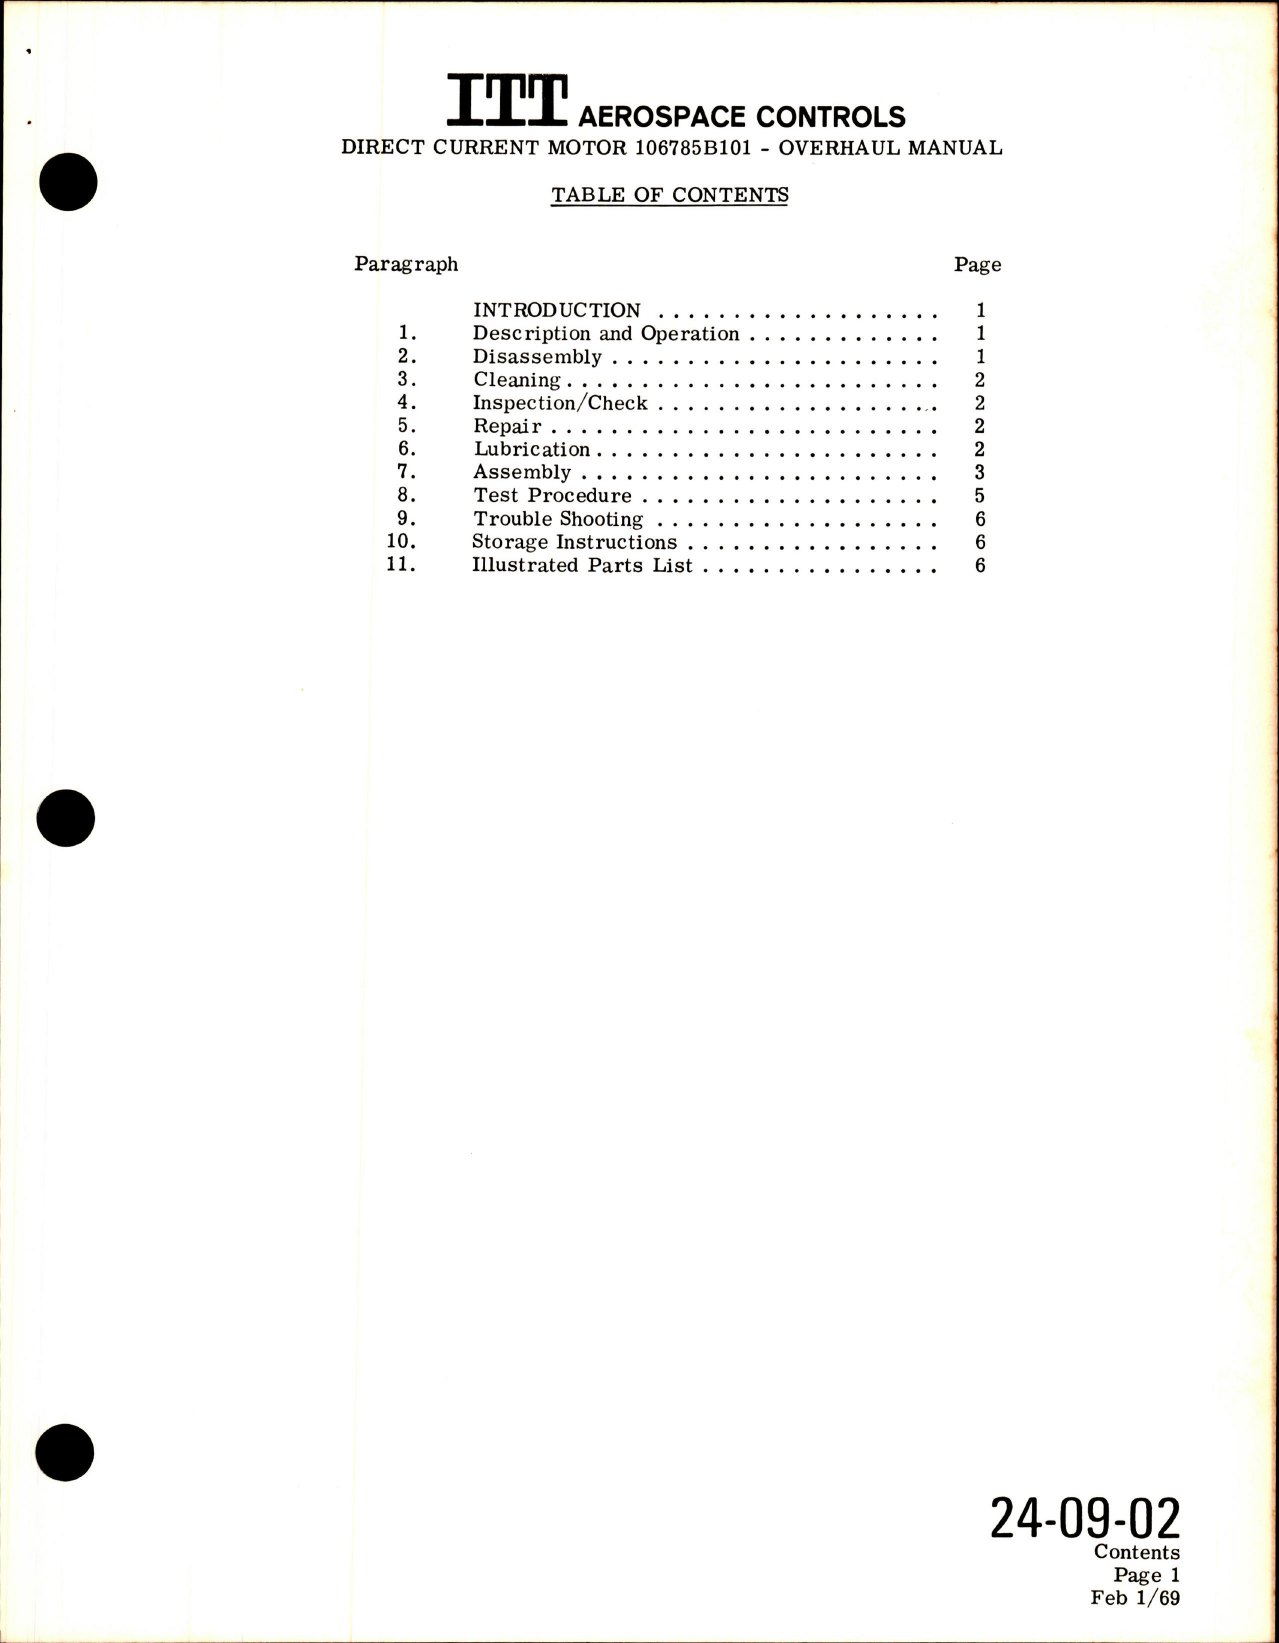 Sample page 5 from AirCorps Library document: Overhaul Manual with Illustrated Parts List for DC Motor Assembly - Part 106785B101 